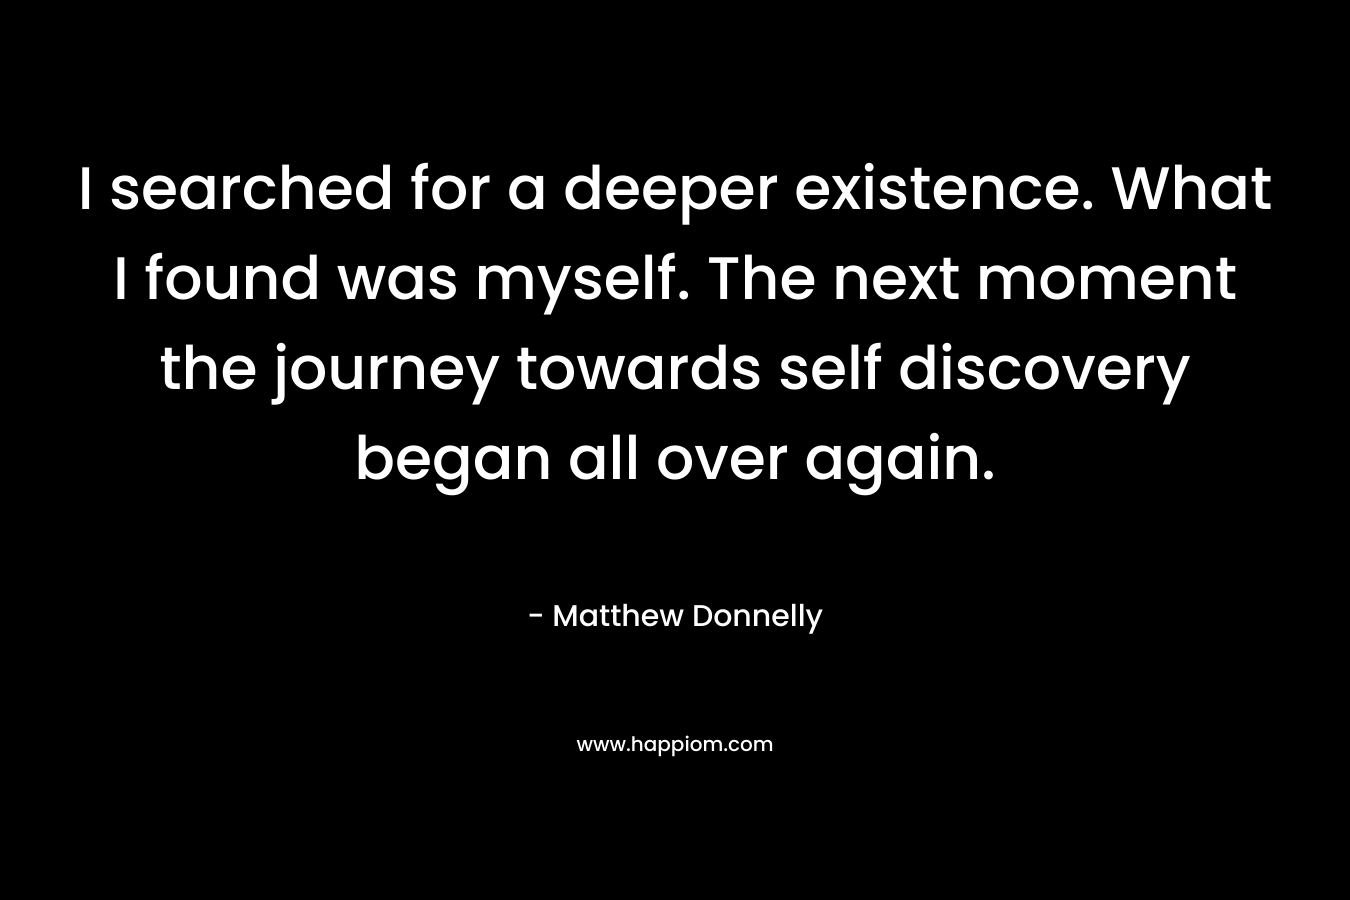 I searched for a deeper existence. What I found was myself. The next moment the journey towards self discovery began all over again. – Matthew Donnelly